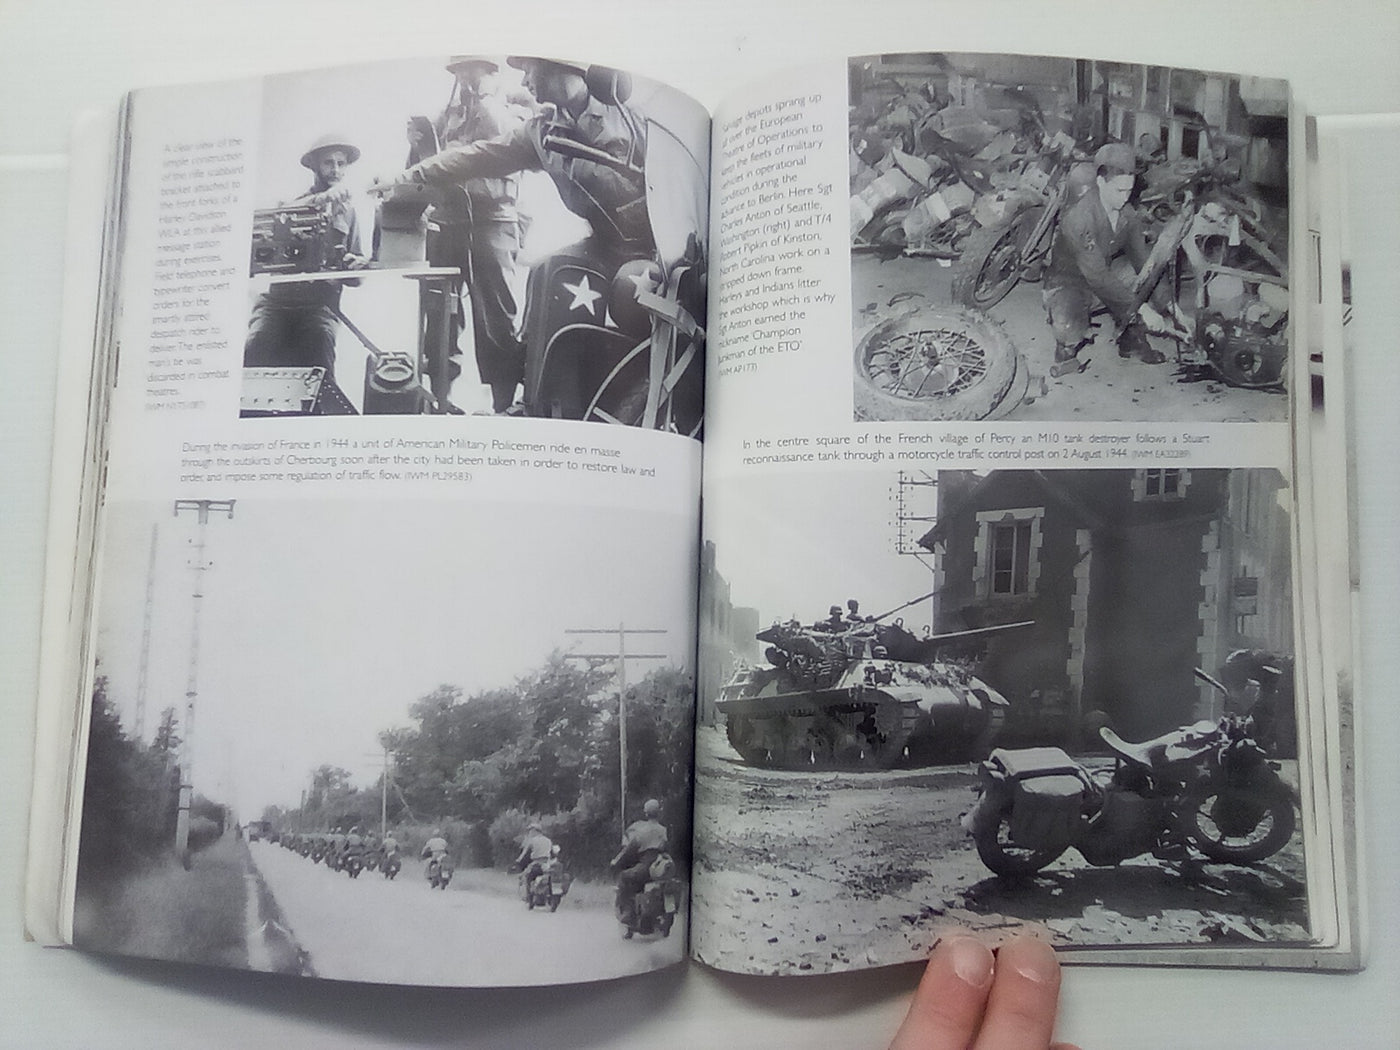 Motorcycles At War - Rare Photos from Wartime Archives by Gavin Birch